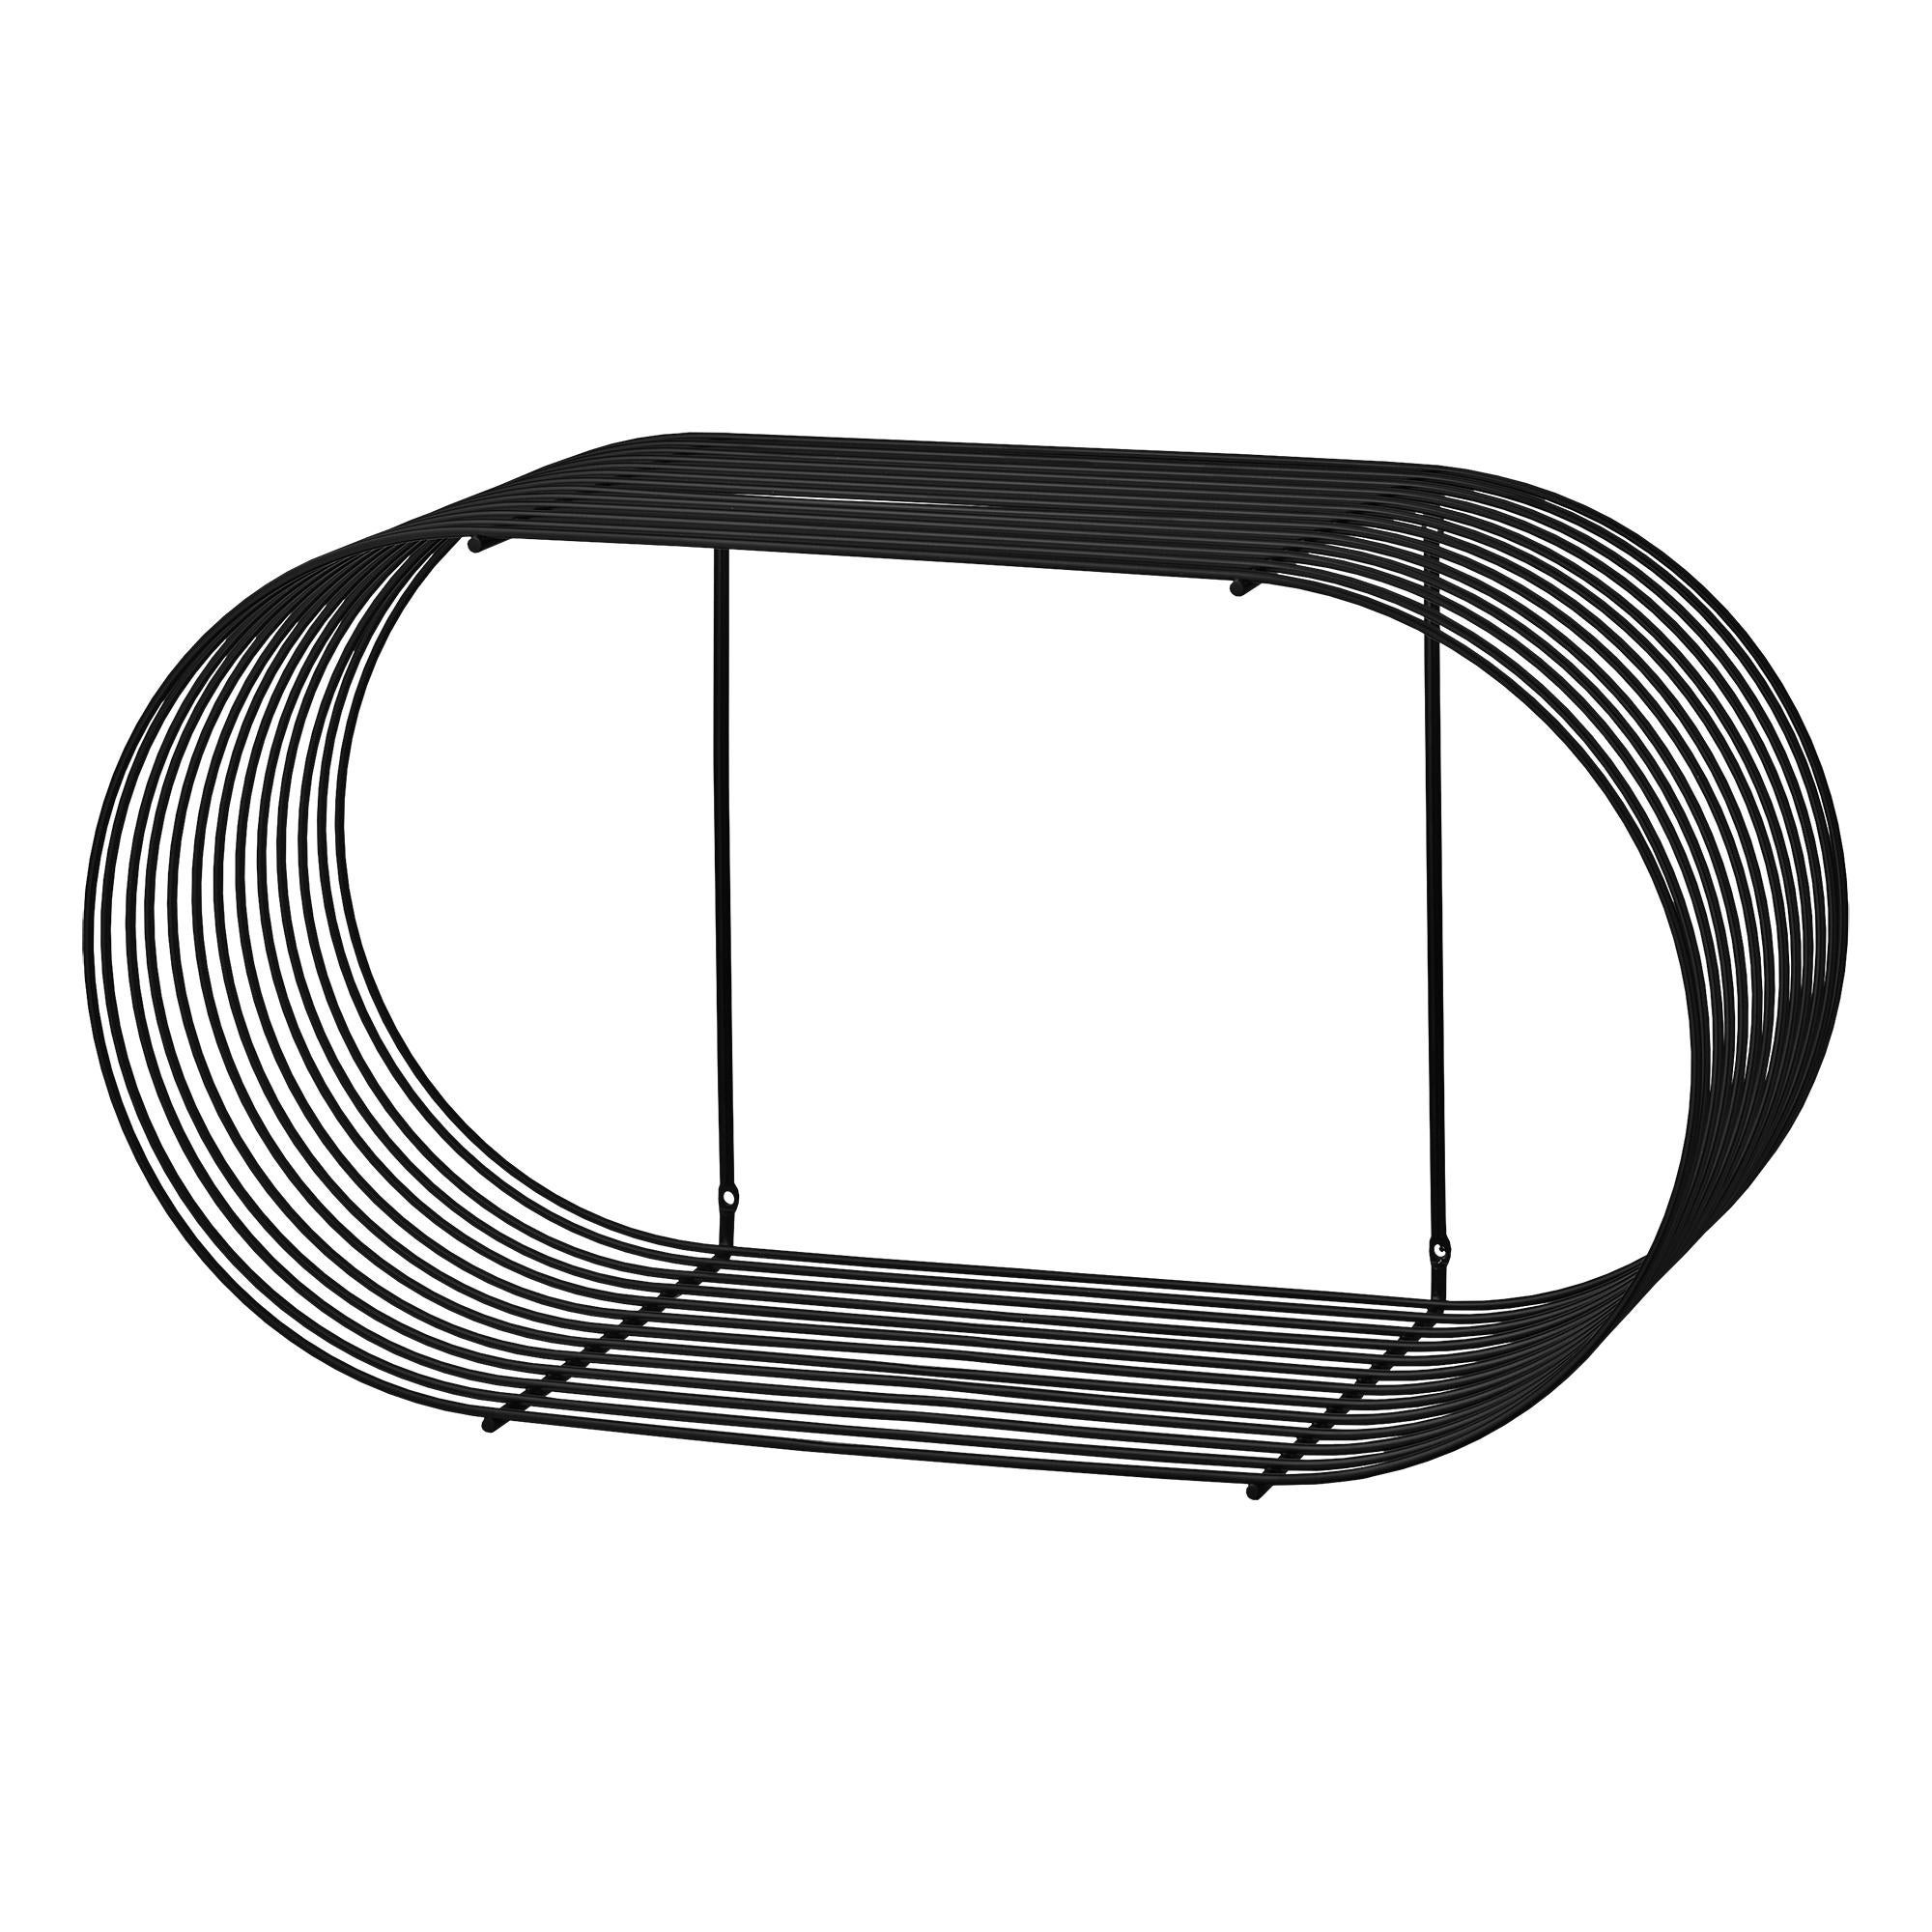 Large black contemporary shelf
Dimensions: L 61.4 x W 25.3 x H 33 cm 
Materials: Steel.
Also available in gold and silver.


It is not always easy to determine what makes a design become an icon, but it seems the Curva shelf has accomplished